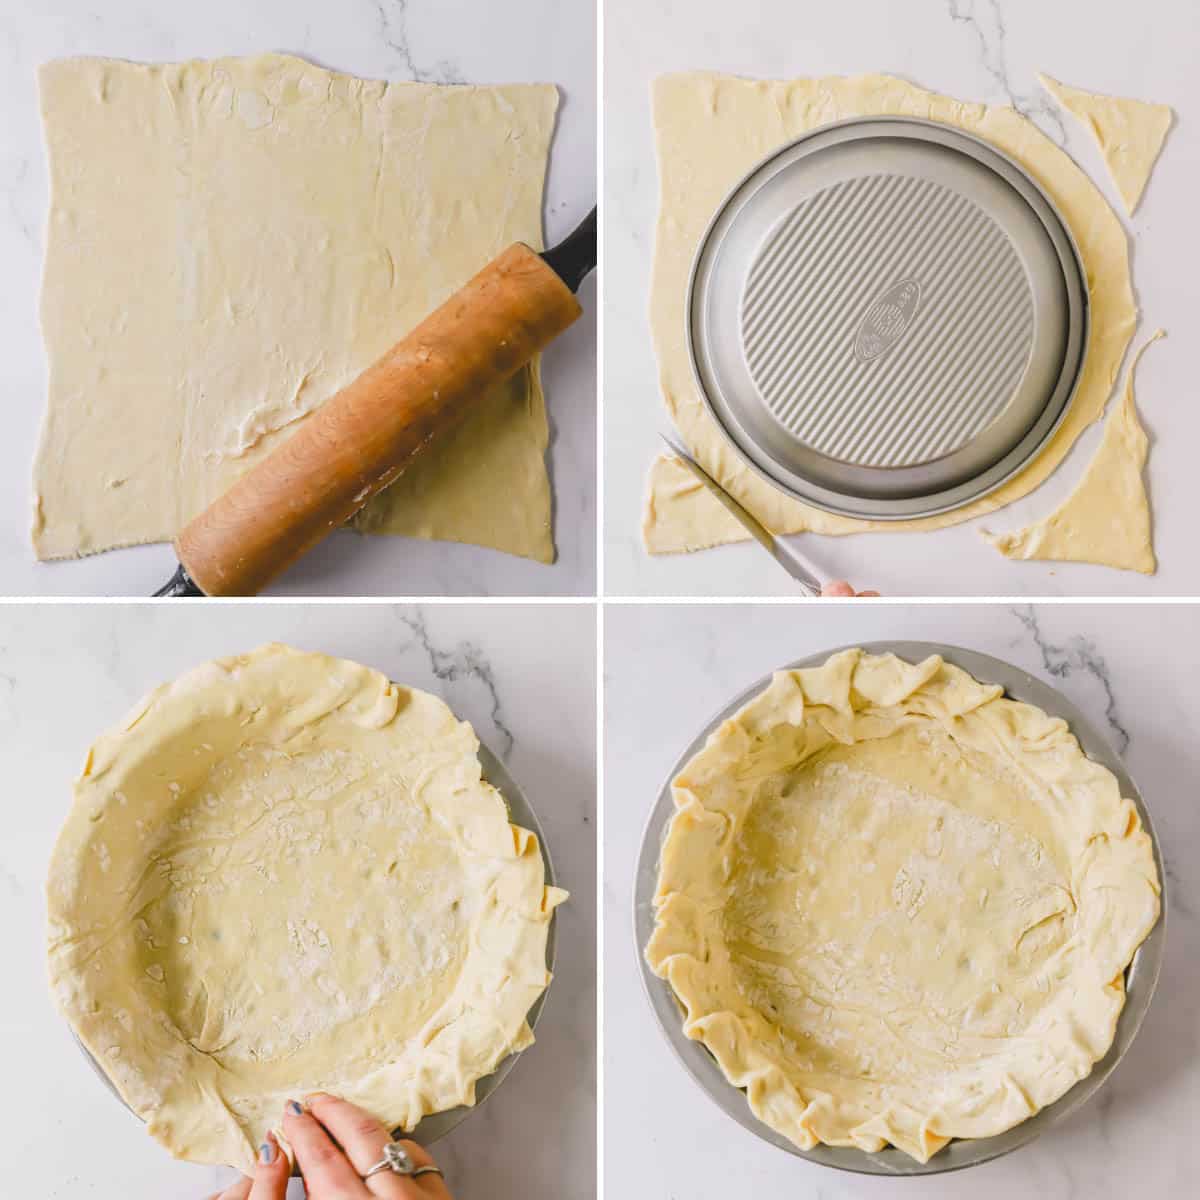 Puff pastry dough being rolled out and fitted to a pie dish.